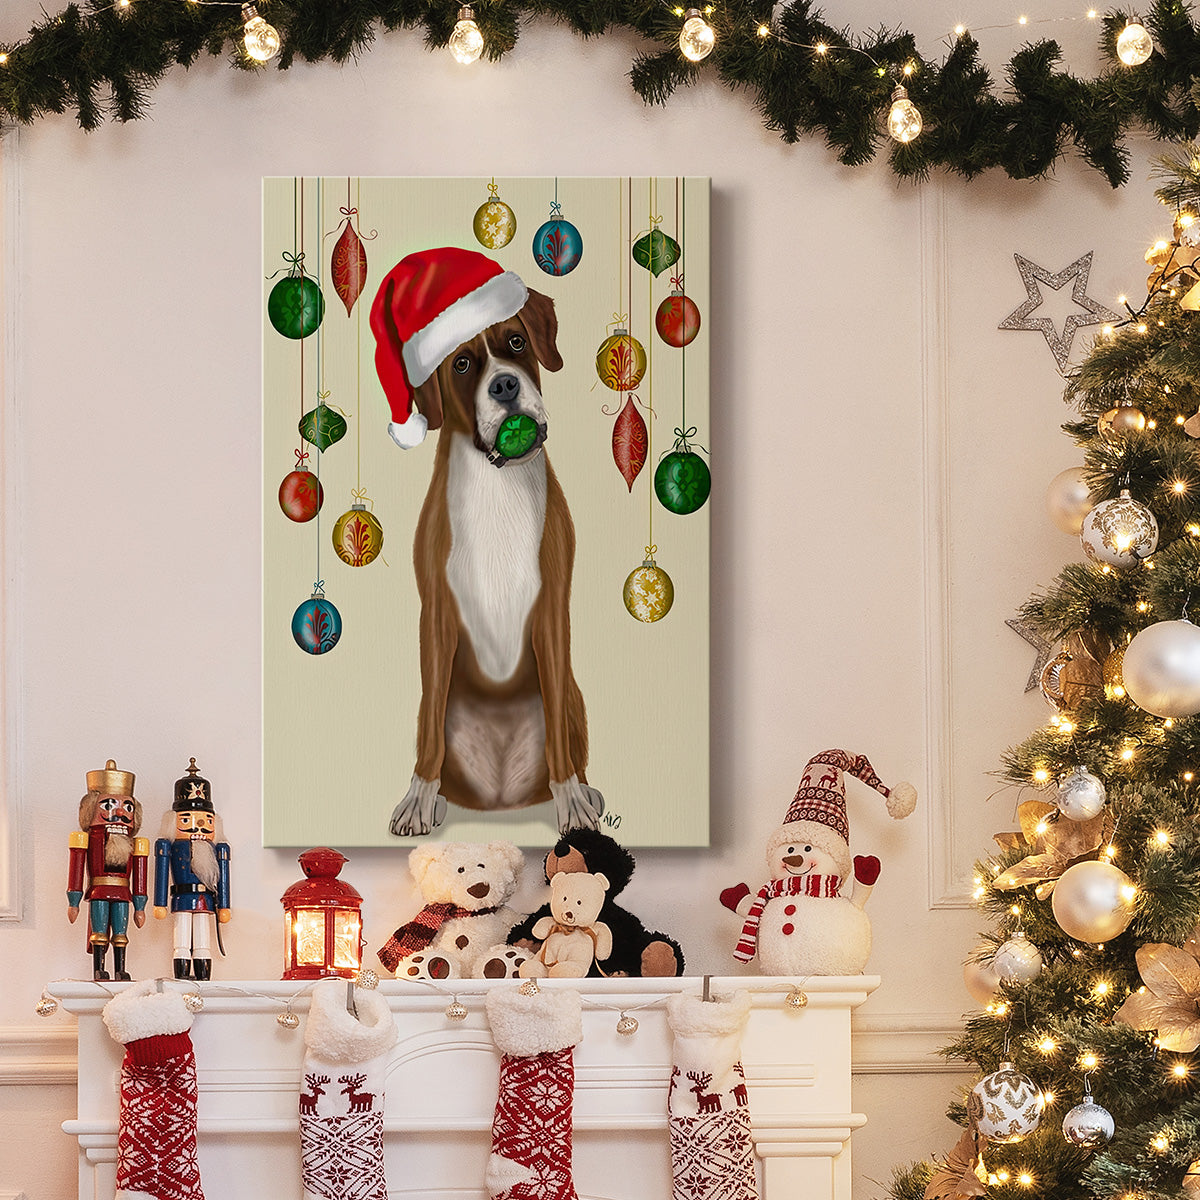 Christmas Boxer and Bauble Ball - Gallery Wrapped Canvas